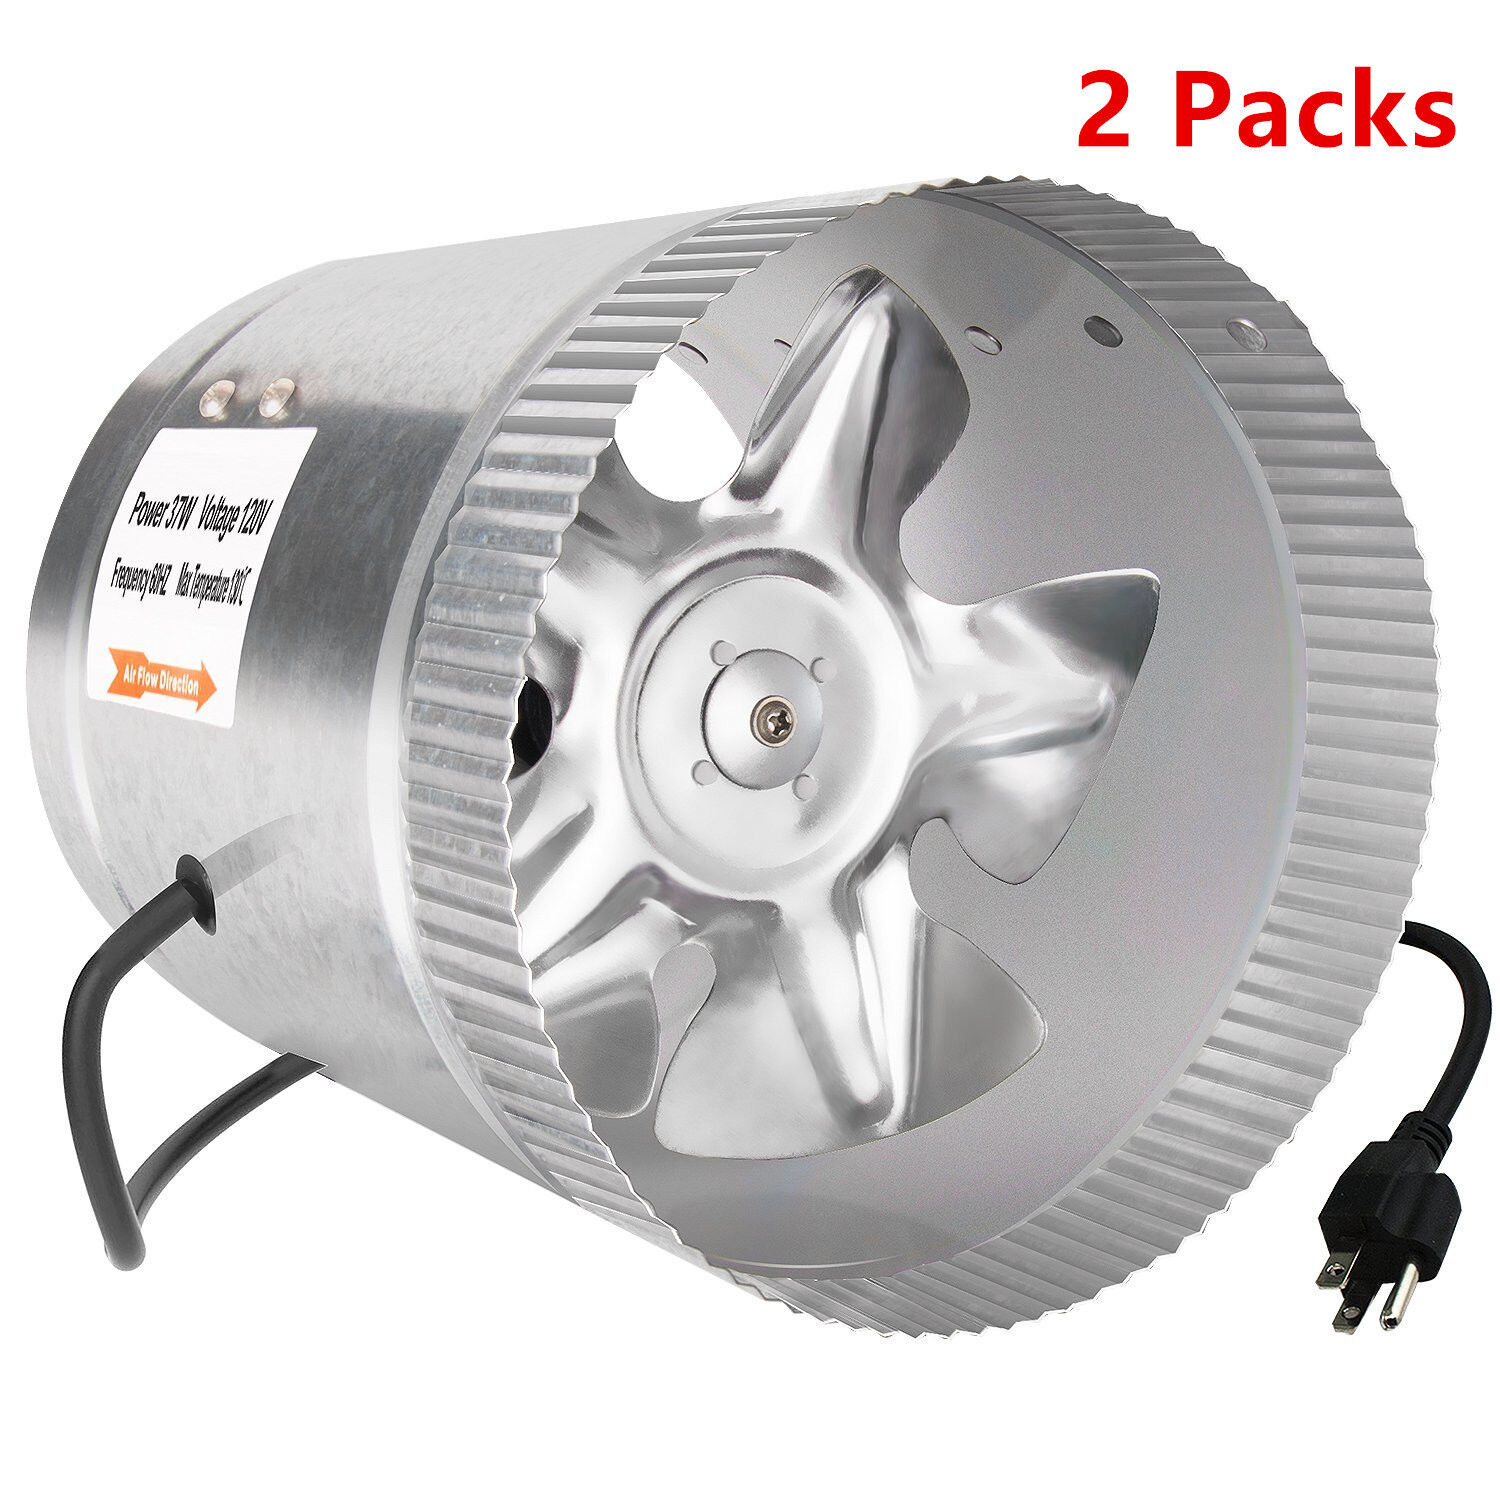 iPower 6 Inch 240 CFM Booster Inline Duct Vent Blower Exhaust & Intake HVAC Fans